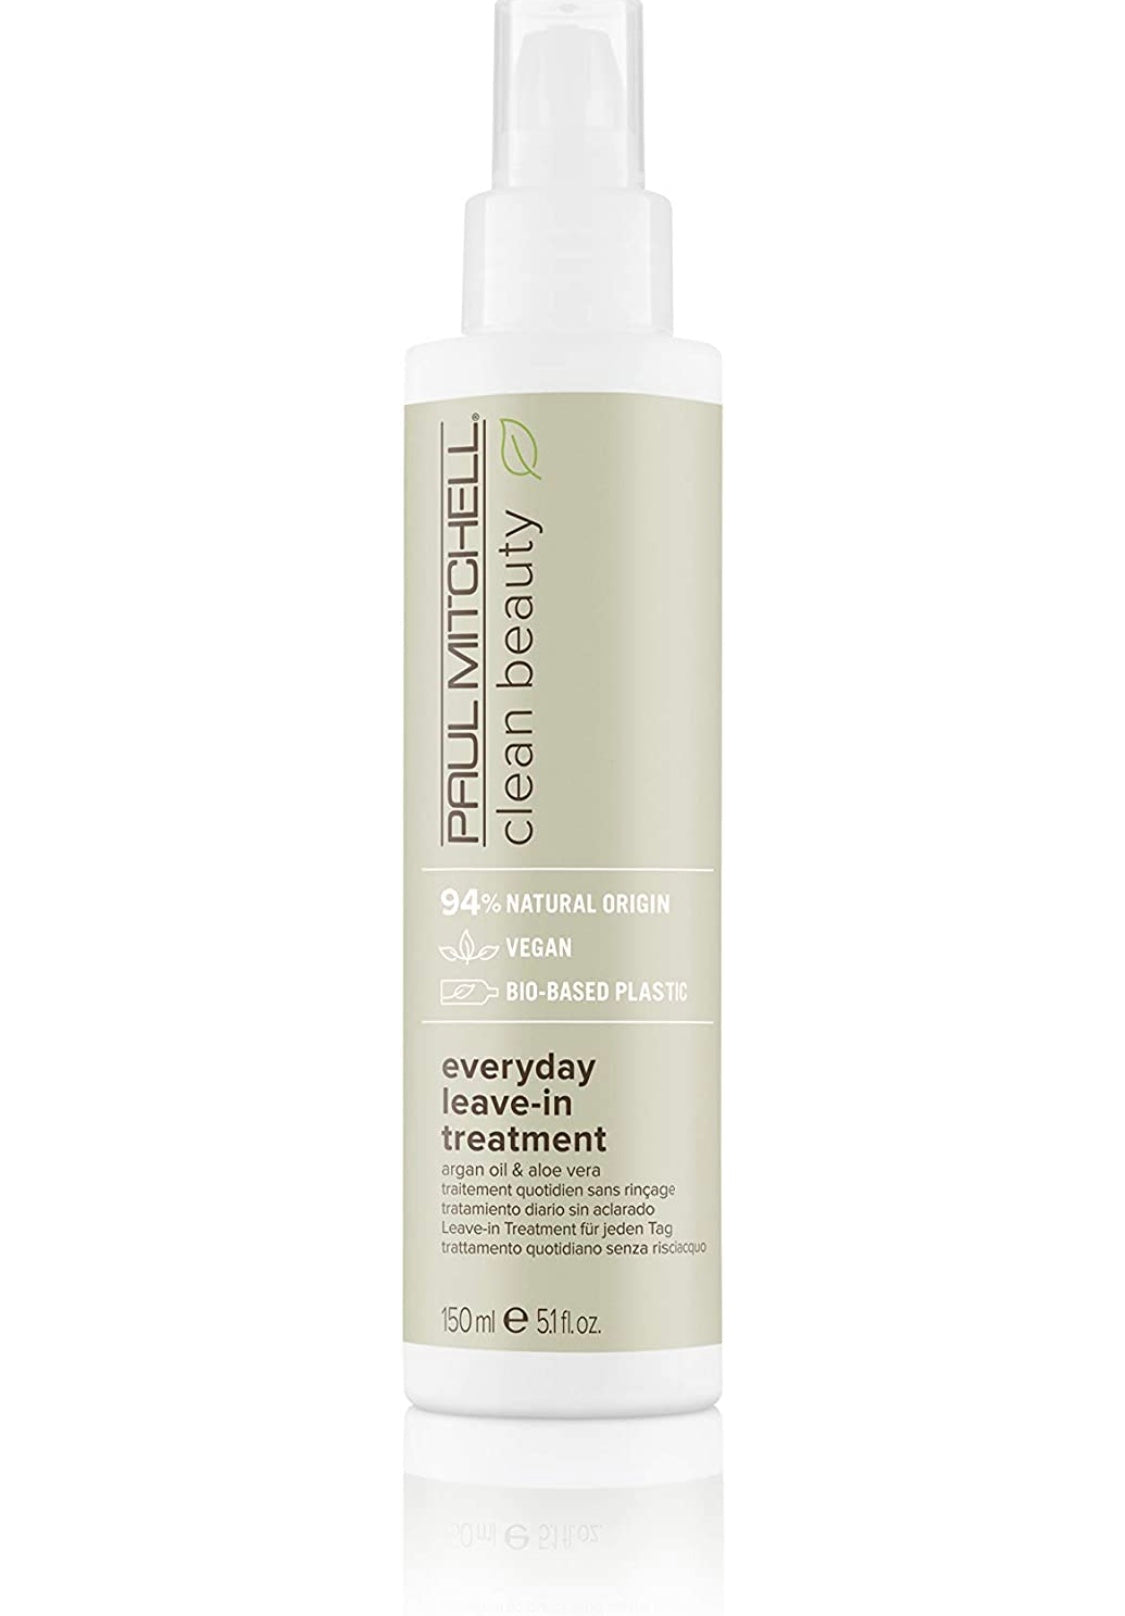 PAUL MITCHELL - Everyday leave in treatment 5.1 fl. oz. / 150 ml